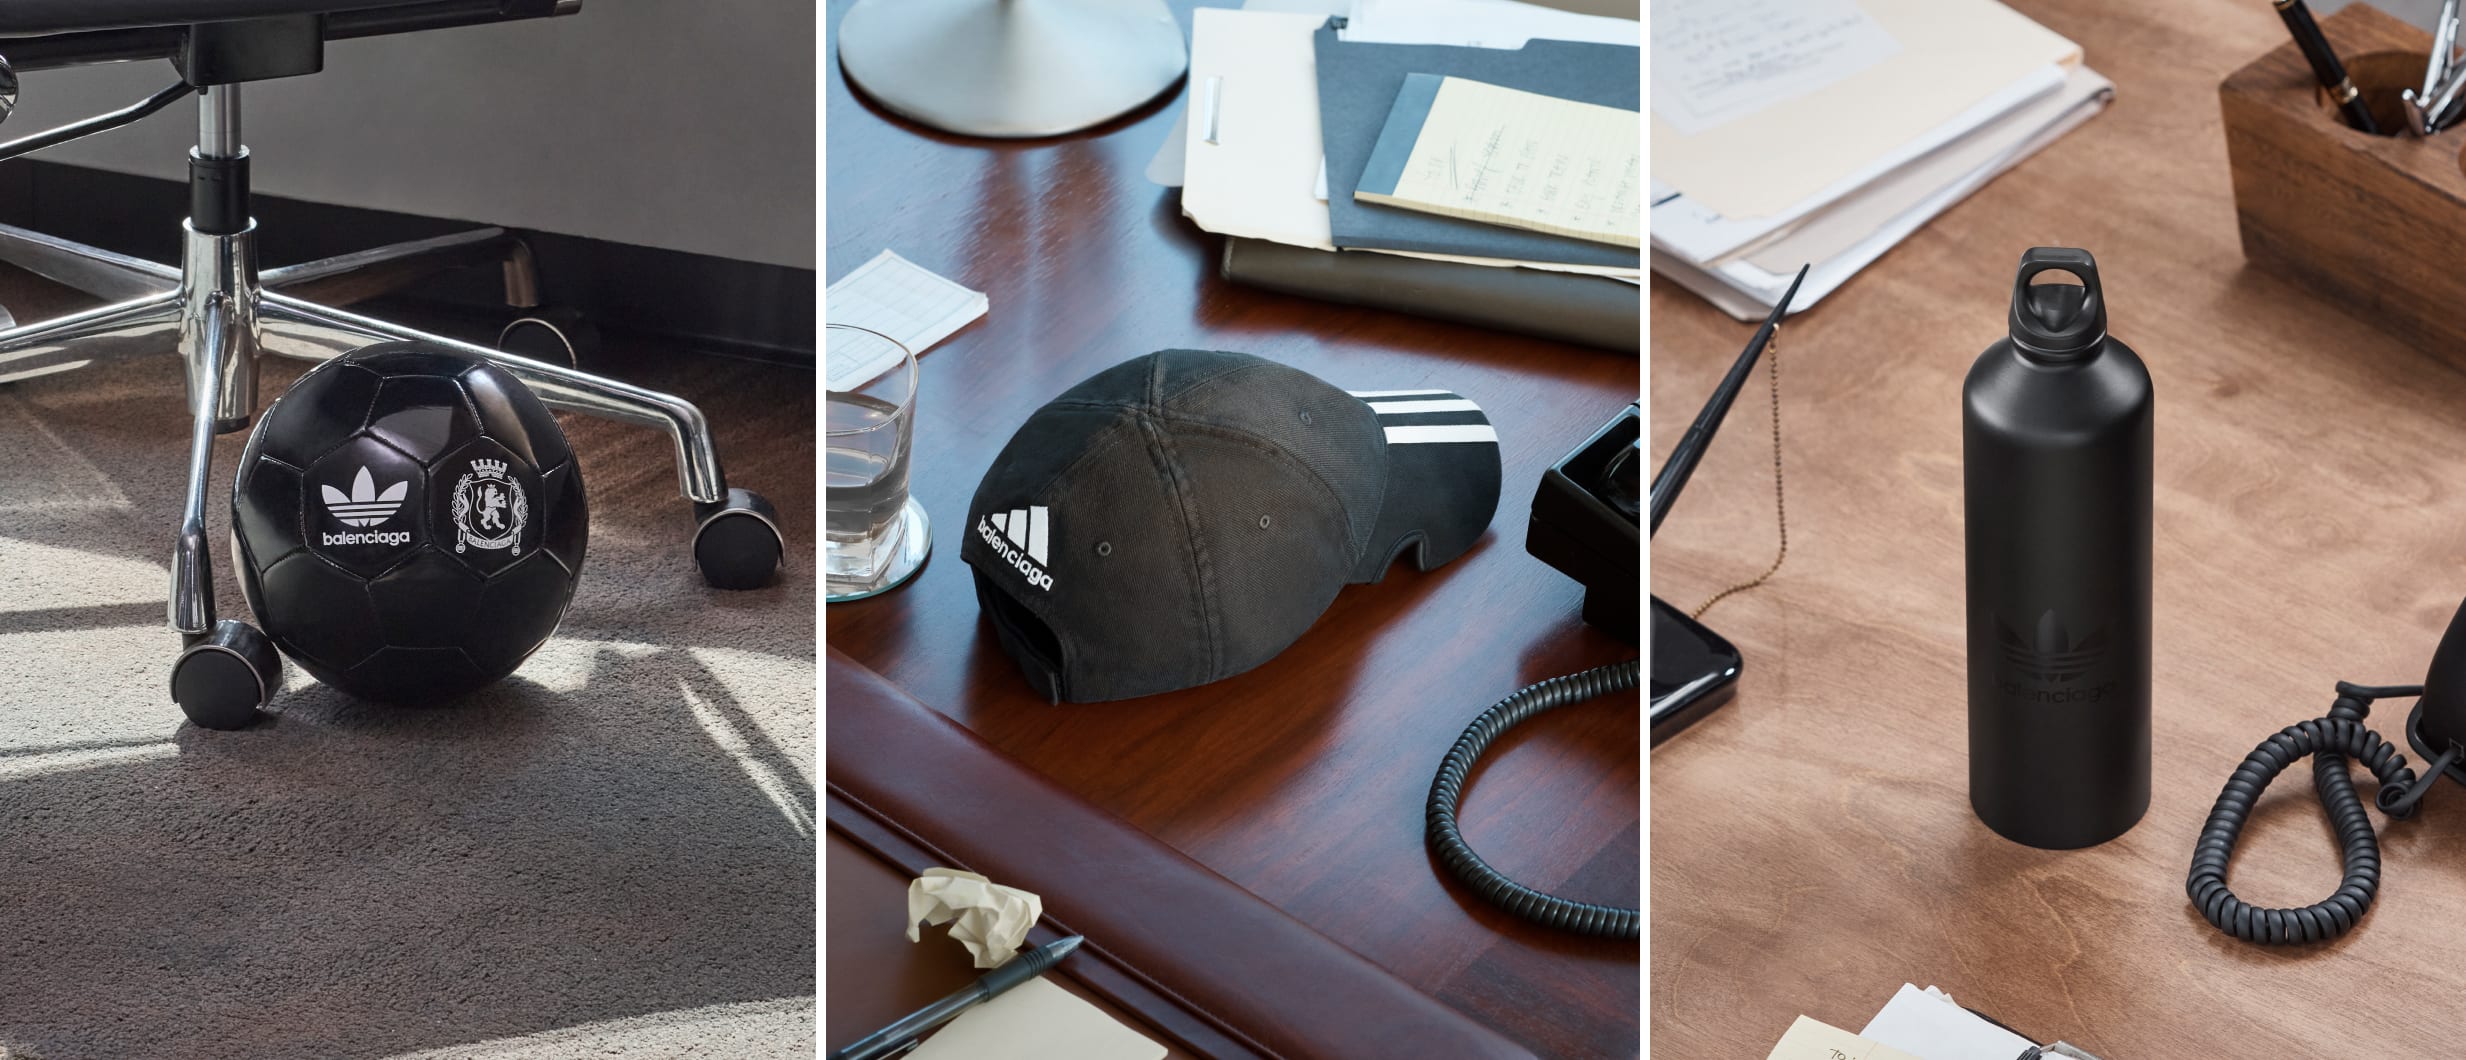 Imagery of a ball, a cap and a drink bottle in an office from the BALENCIAGA / ADIDAS collection.